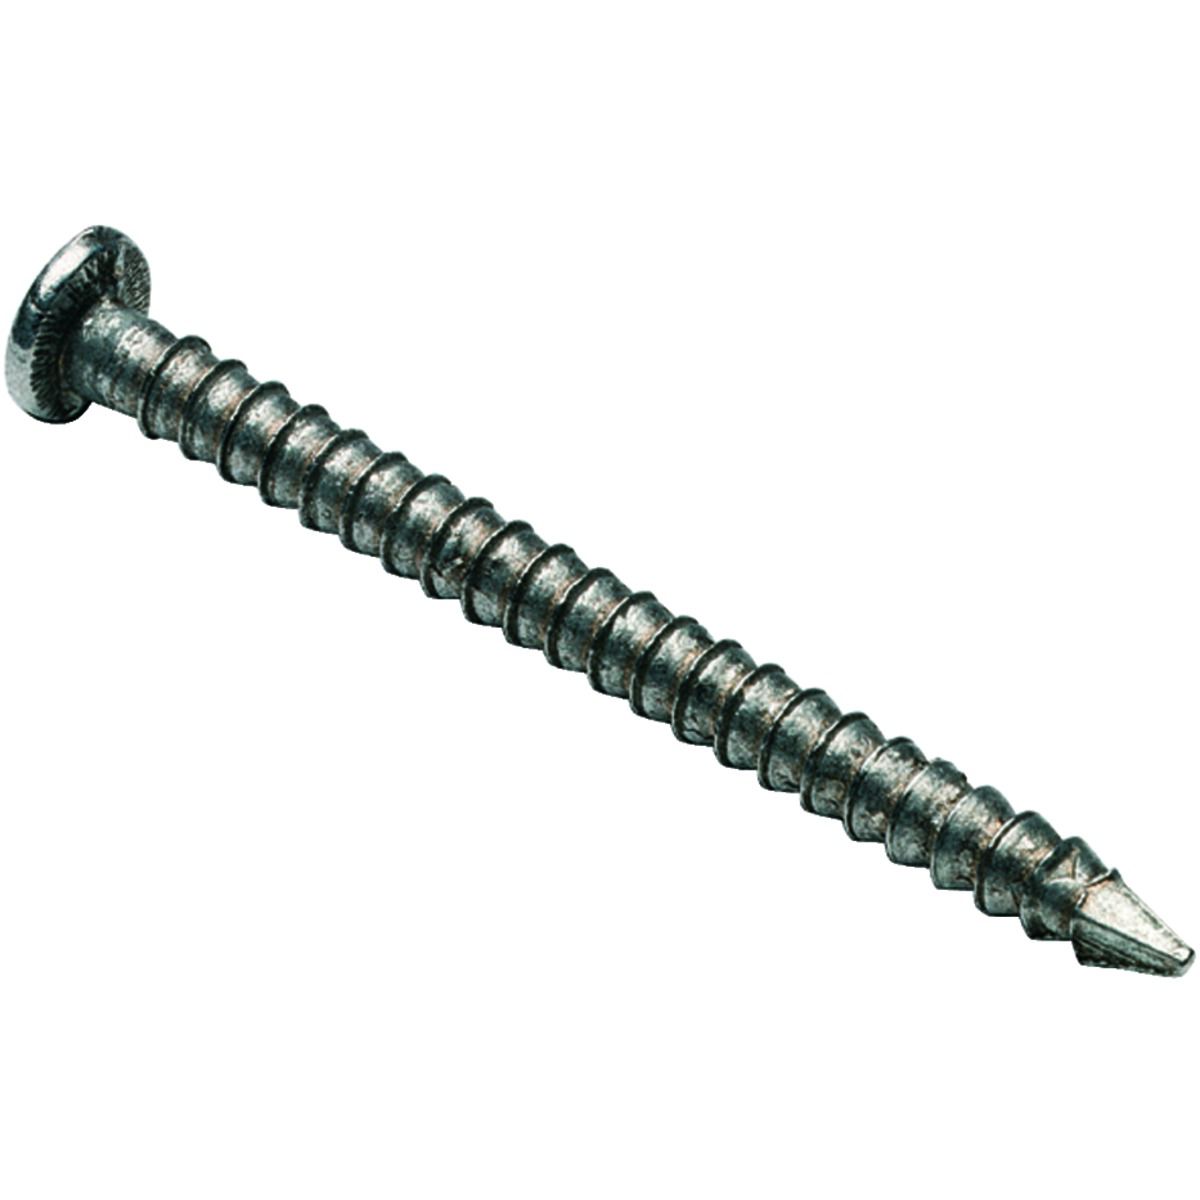 Image of Wickes 65mm Bright Annular Extra Grip Nails - 400g